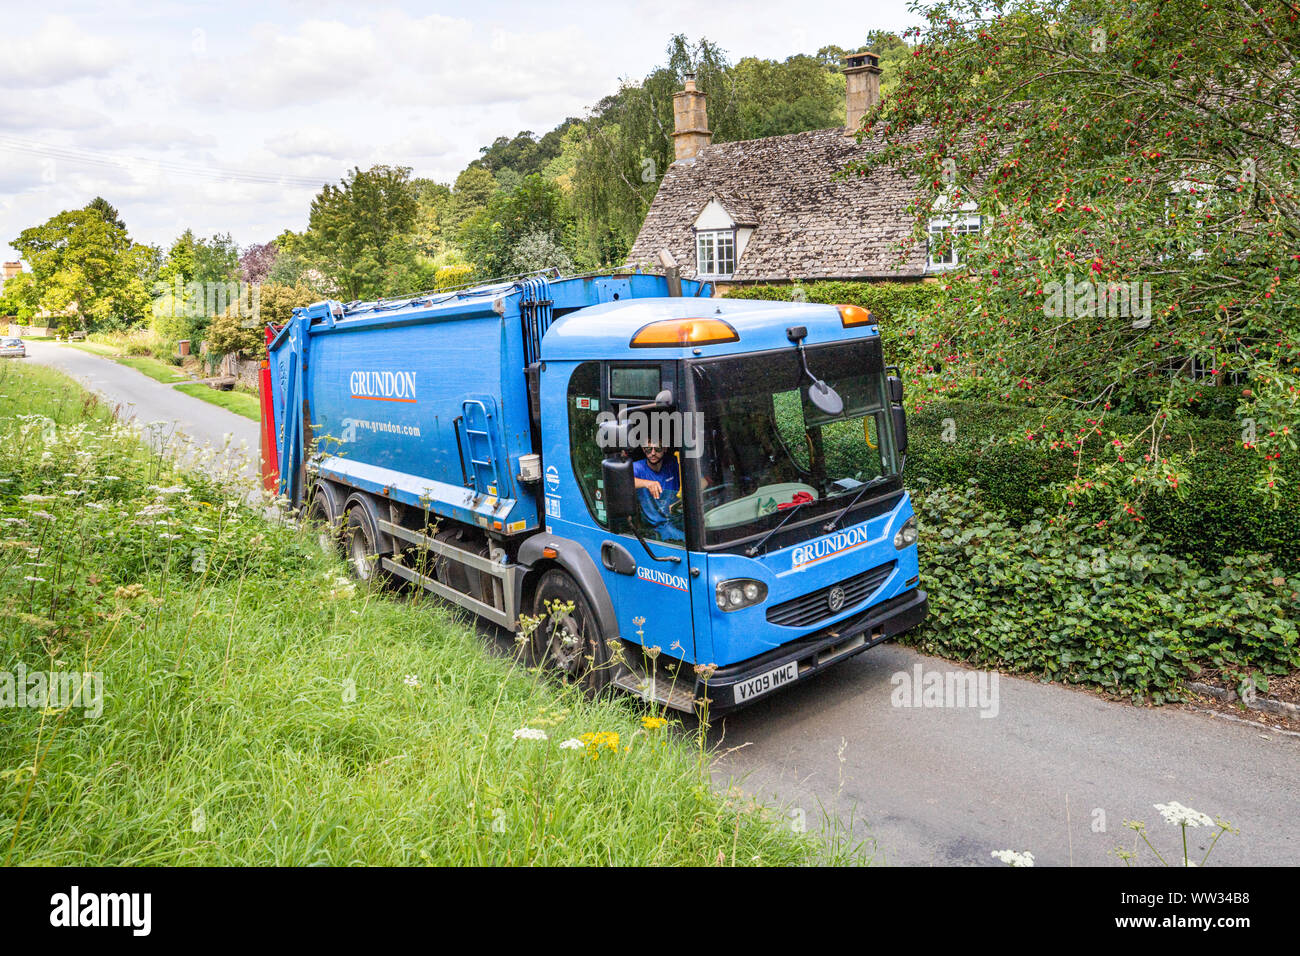 Grundon Waste Management dustbin lorry in a narrow lane in the Cotswold village of Buckland, Gloucestershire UK Stock Photo